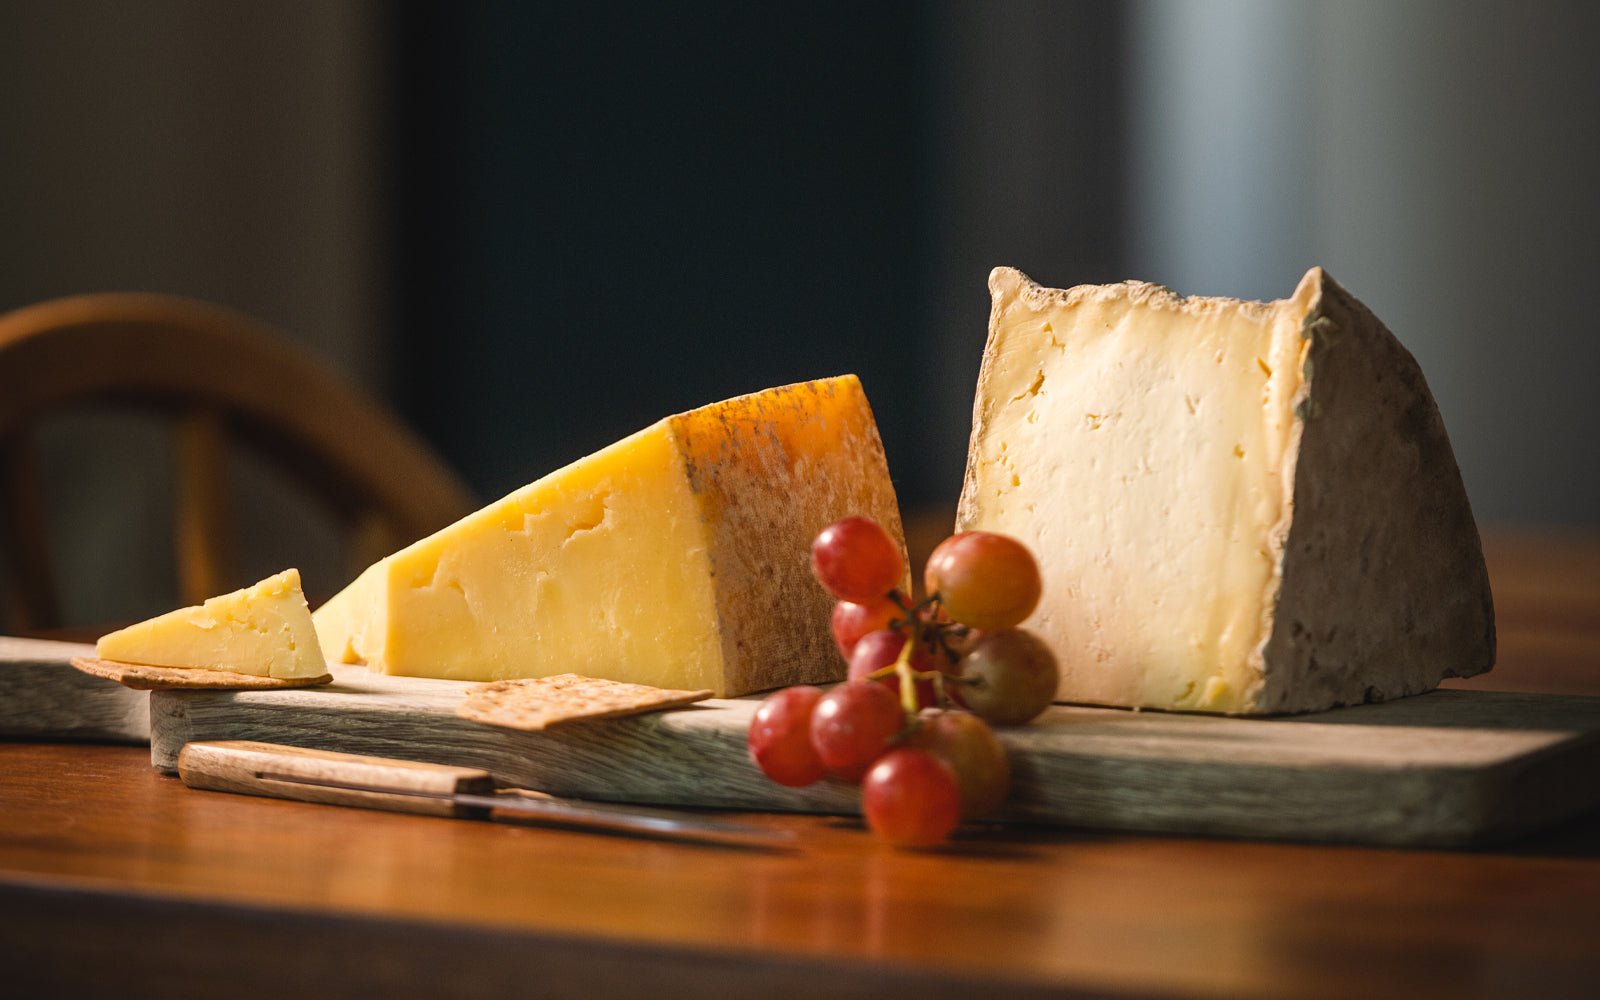 Real traditional handmade cheese by the Trethowan Brothers